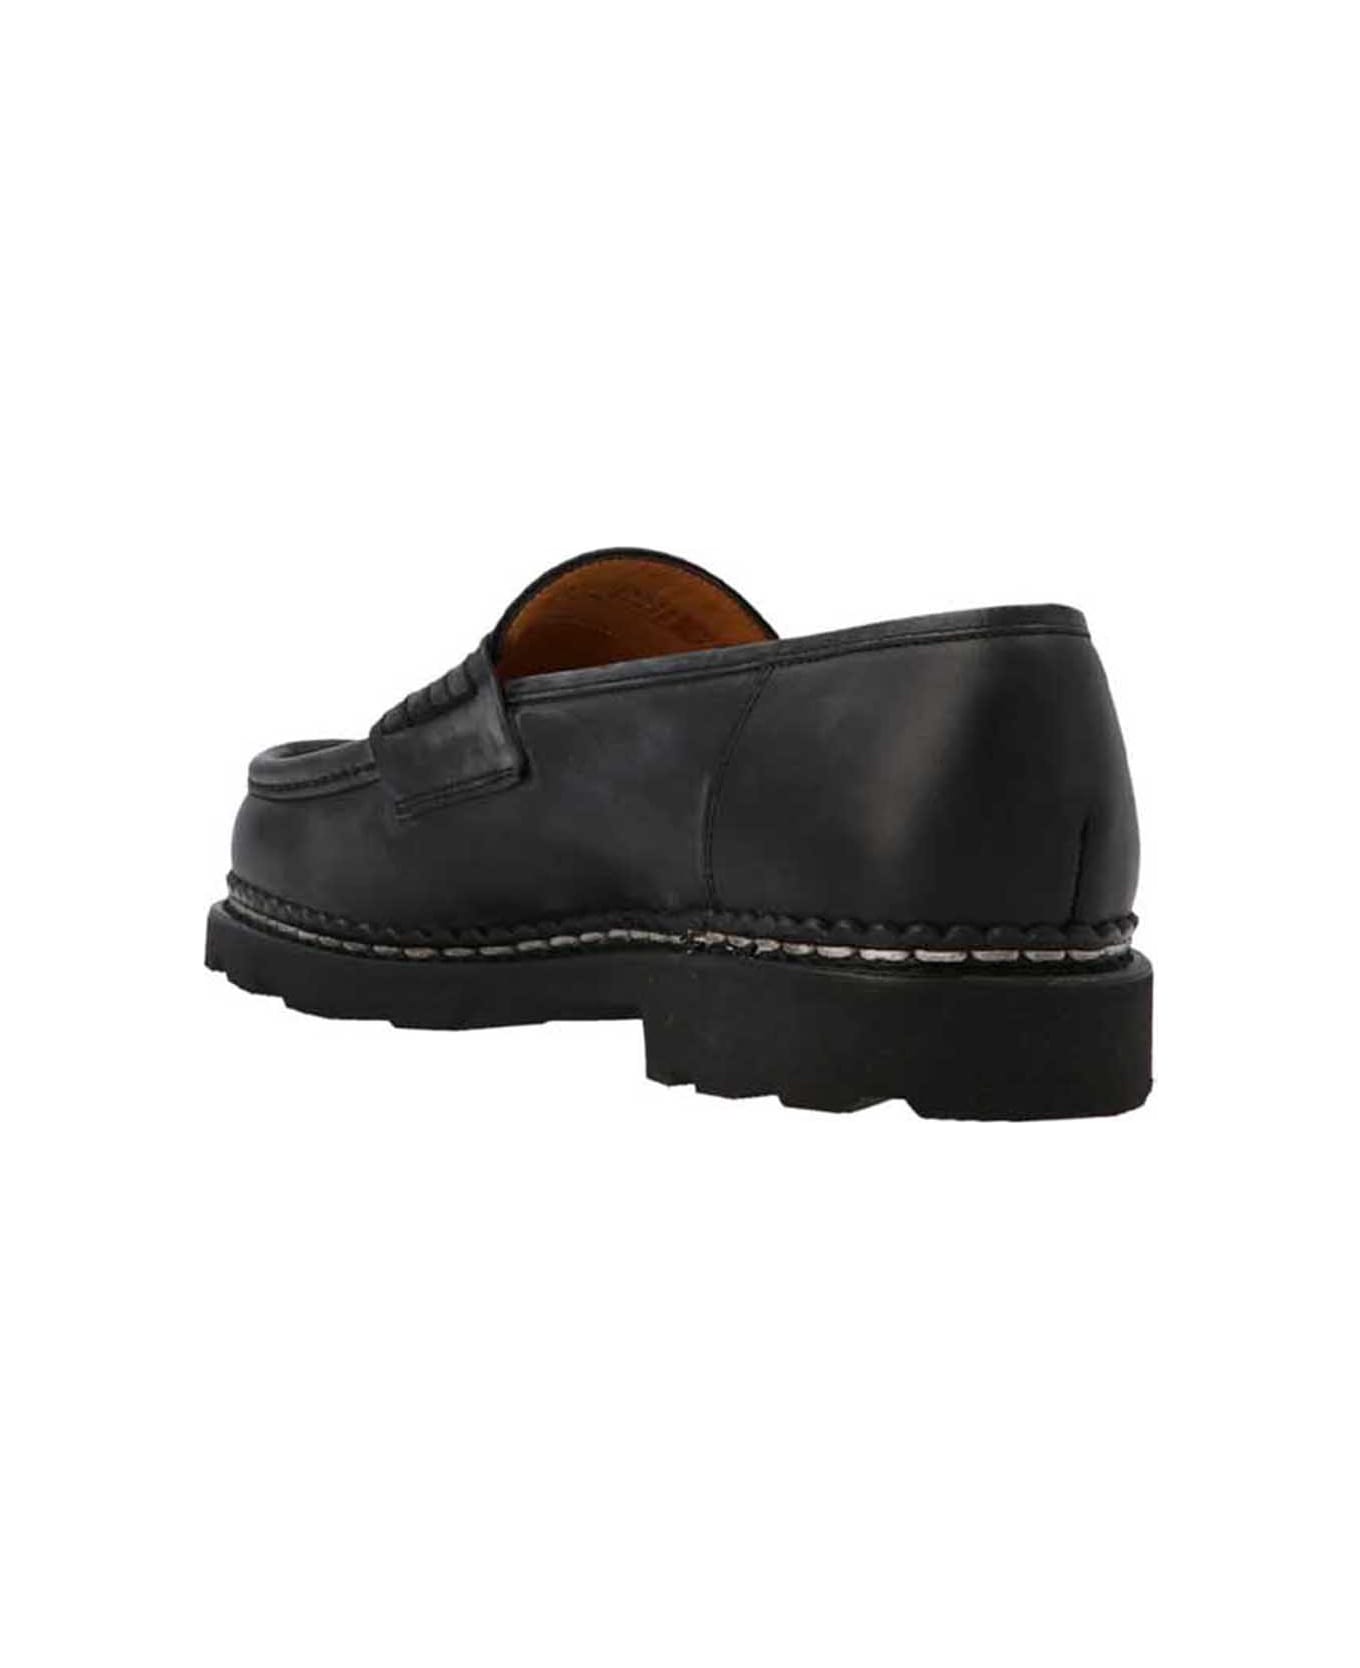 Paraboot 'remis' Loafers - Black   ローファー＆デッキシューズ